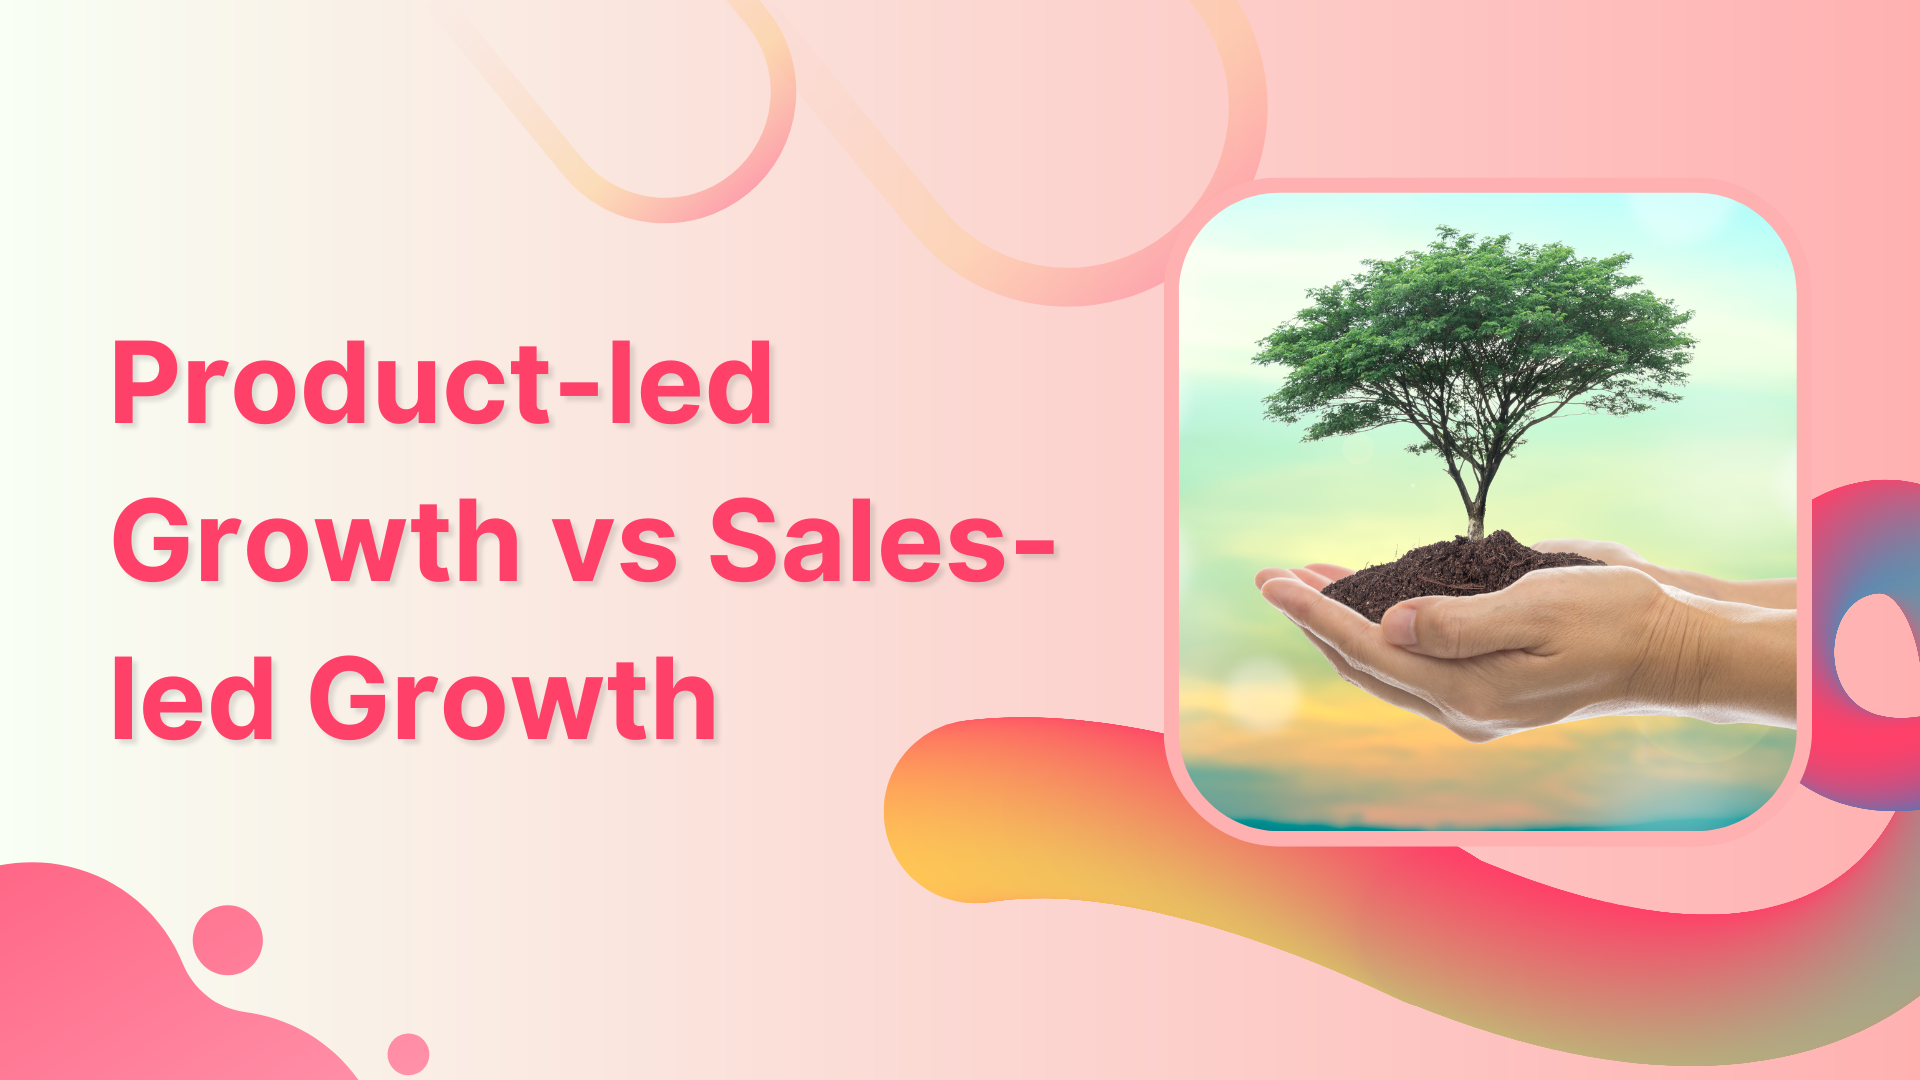 Product-led Growth vs. Sales-led Growth